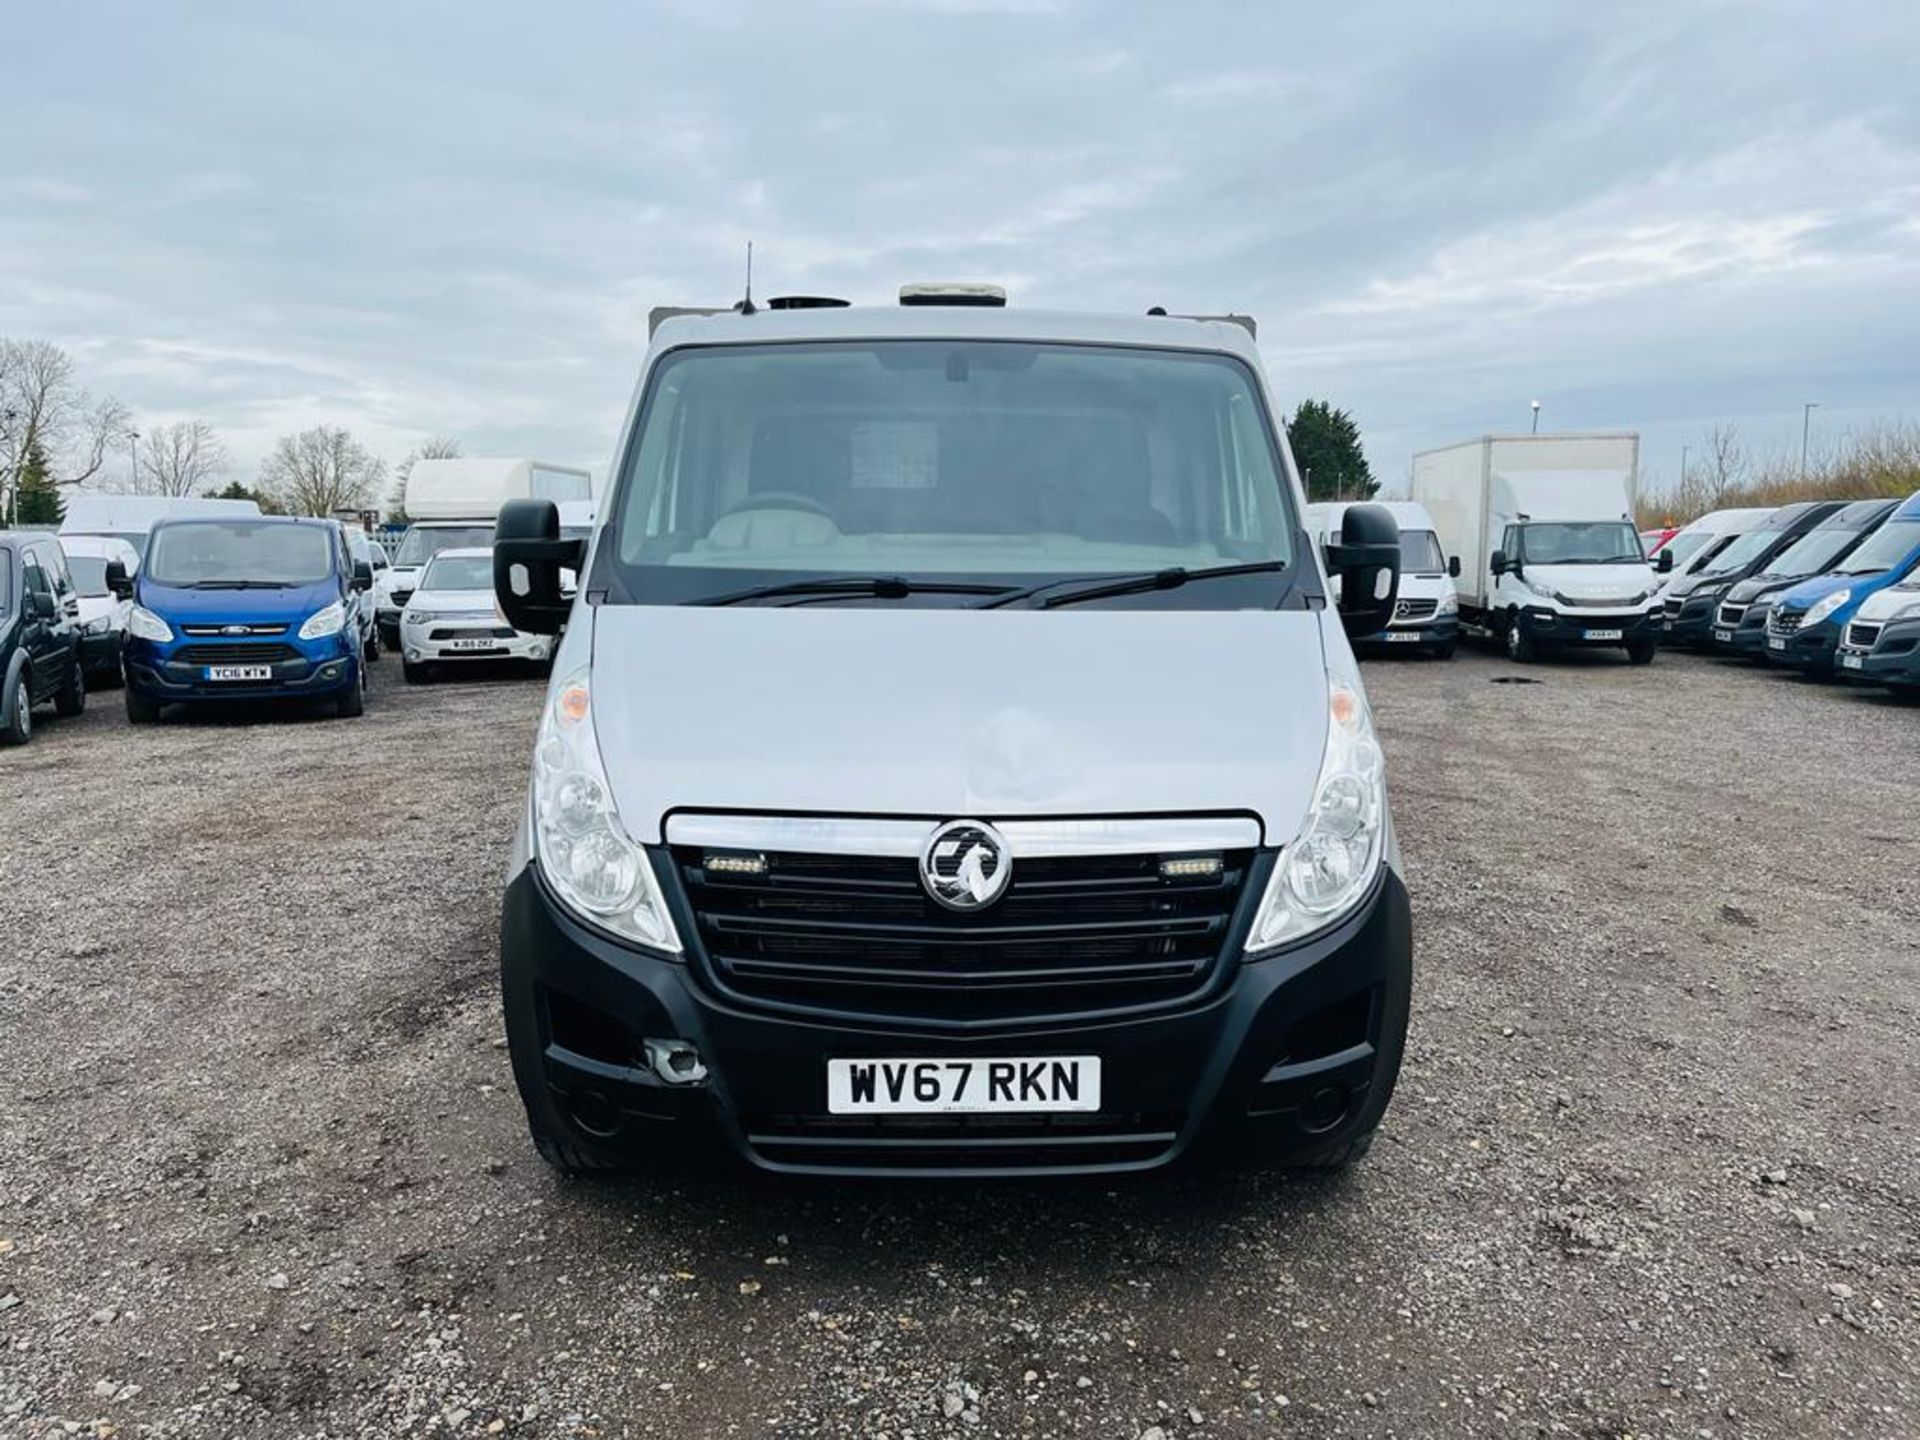 **ON SALE** Vauxhall Movano 2.3 CDTI BlueInjection F3500 L2 Dropside Alloy Body 2017 '67 Reg' - Image 2 of 19